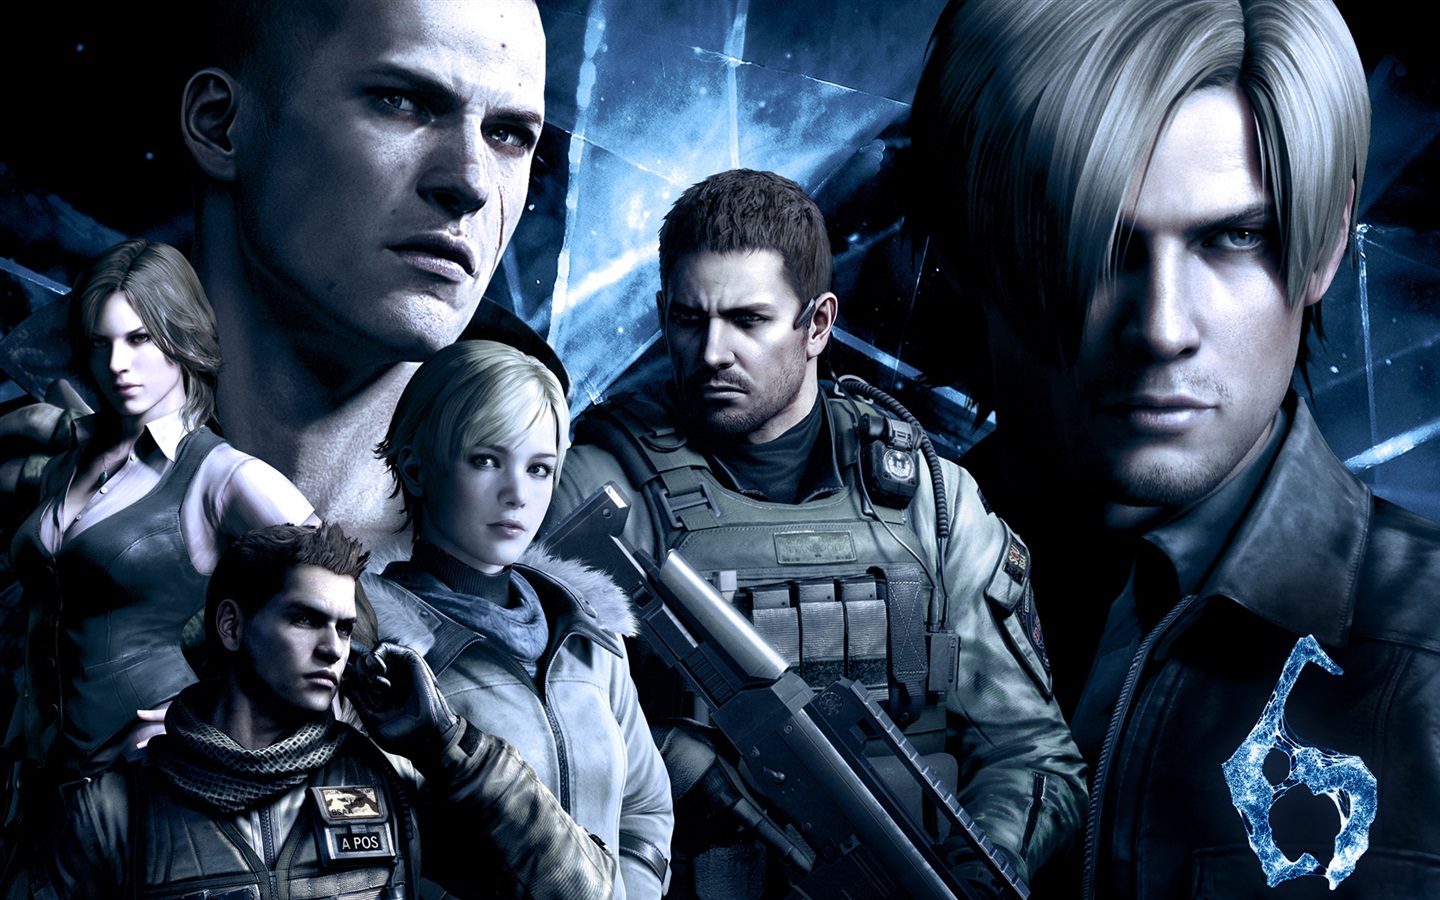 Resident Evil 6 HD game wallpapers #9 - 1440x900